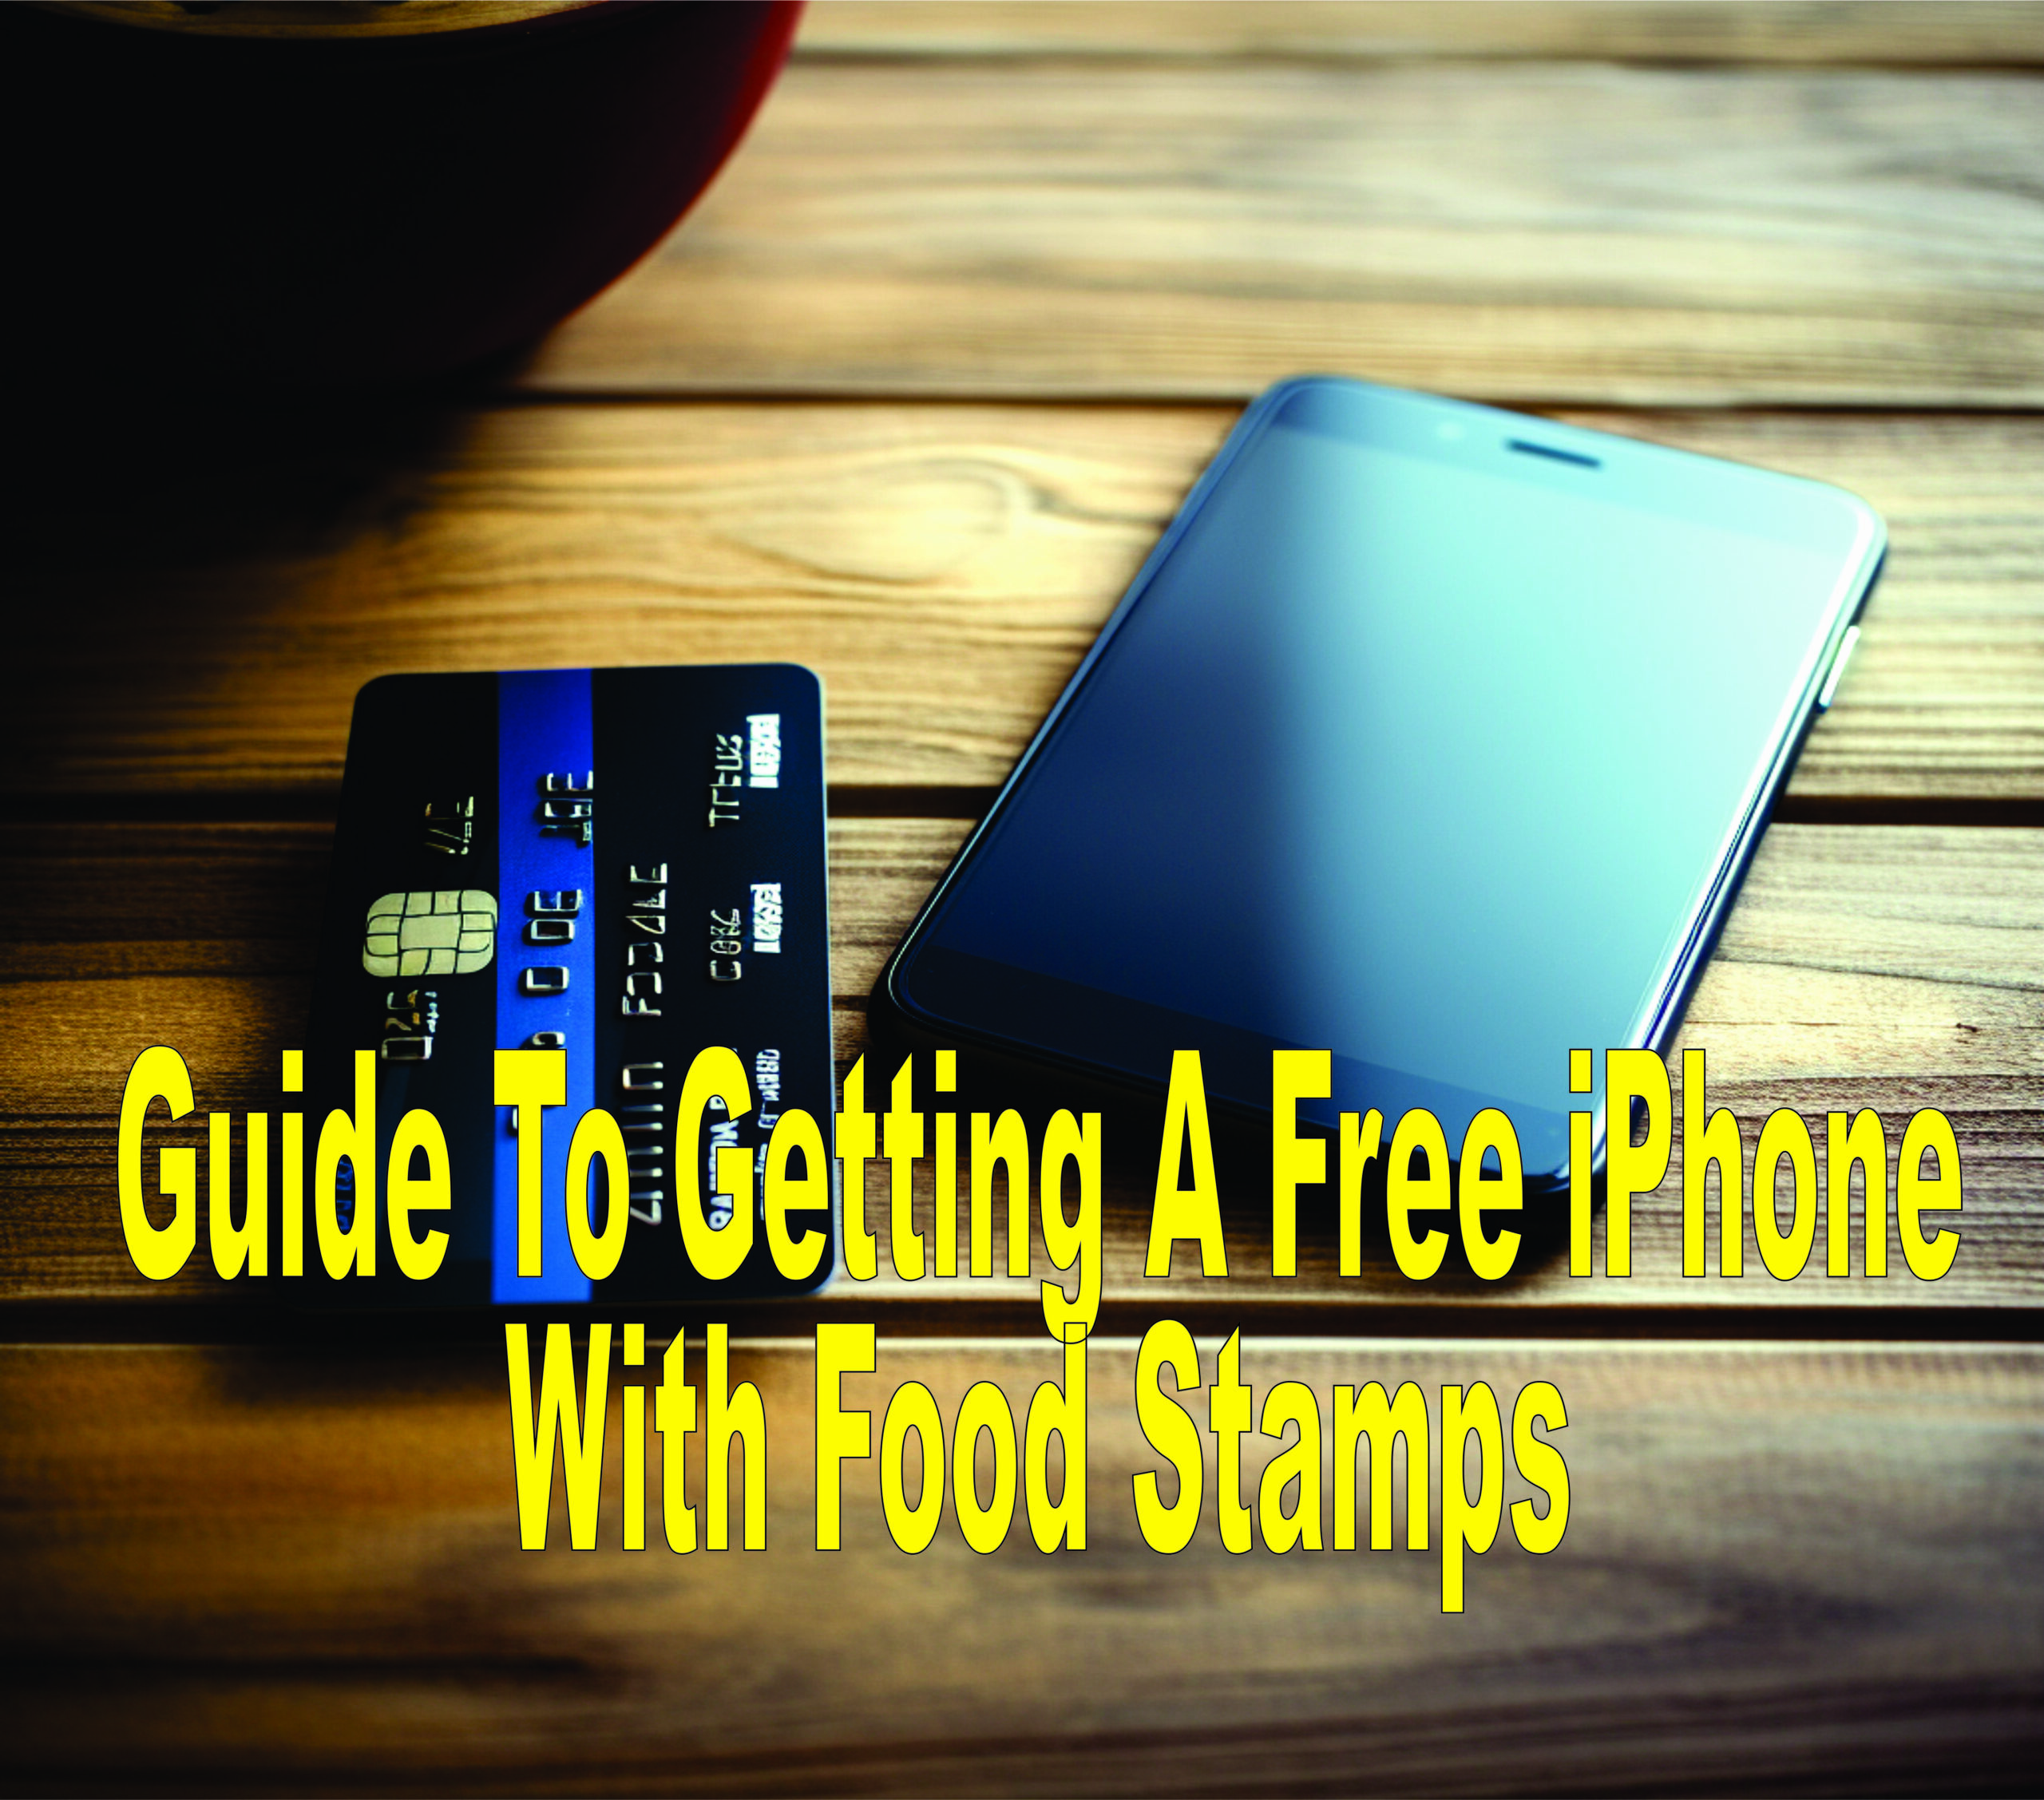 Guide To Getting A Free Iphone With Food Stamps